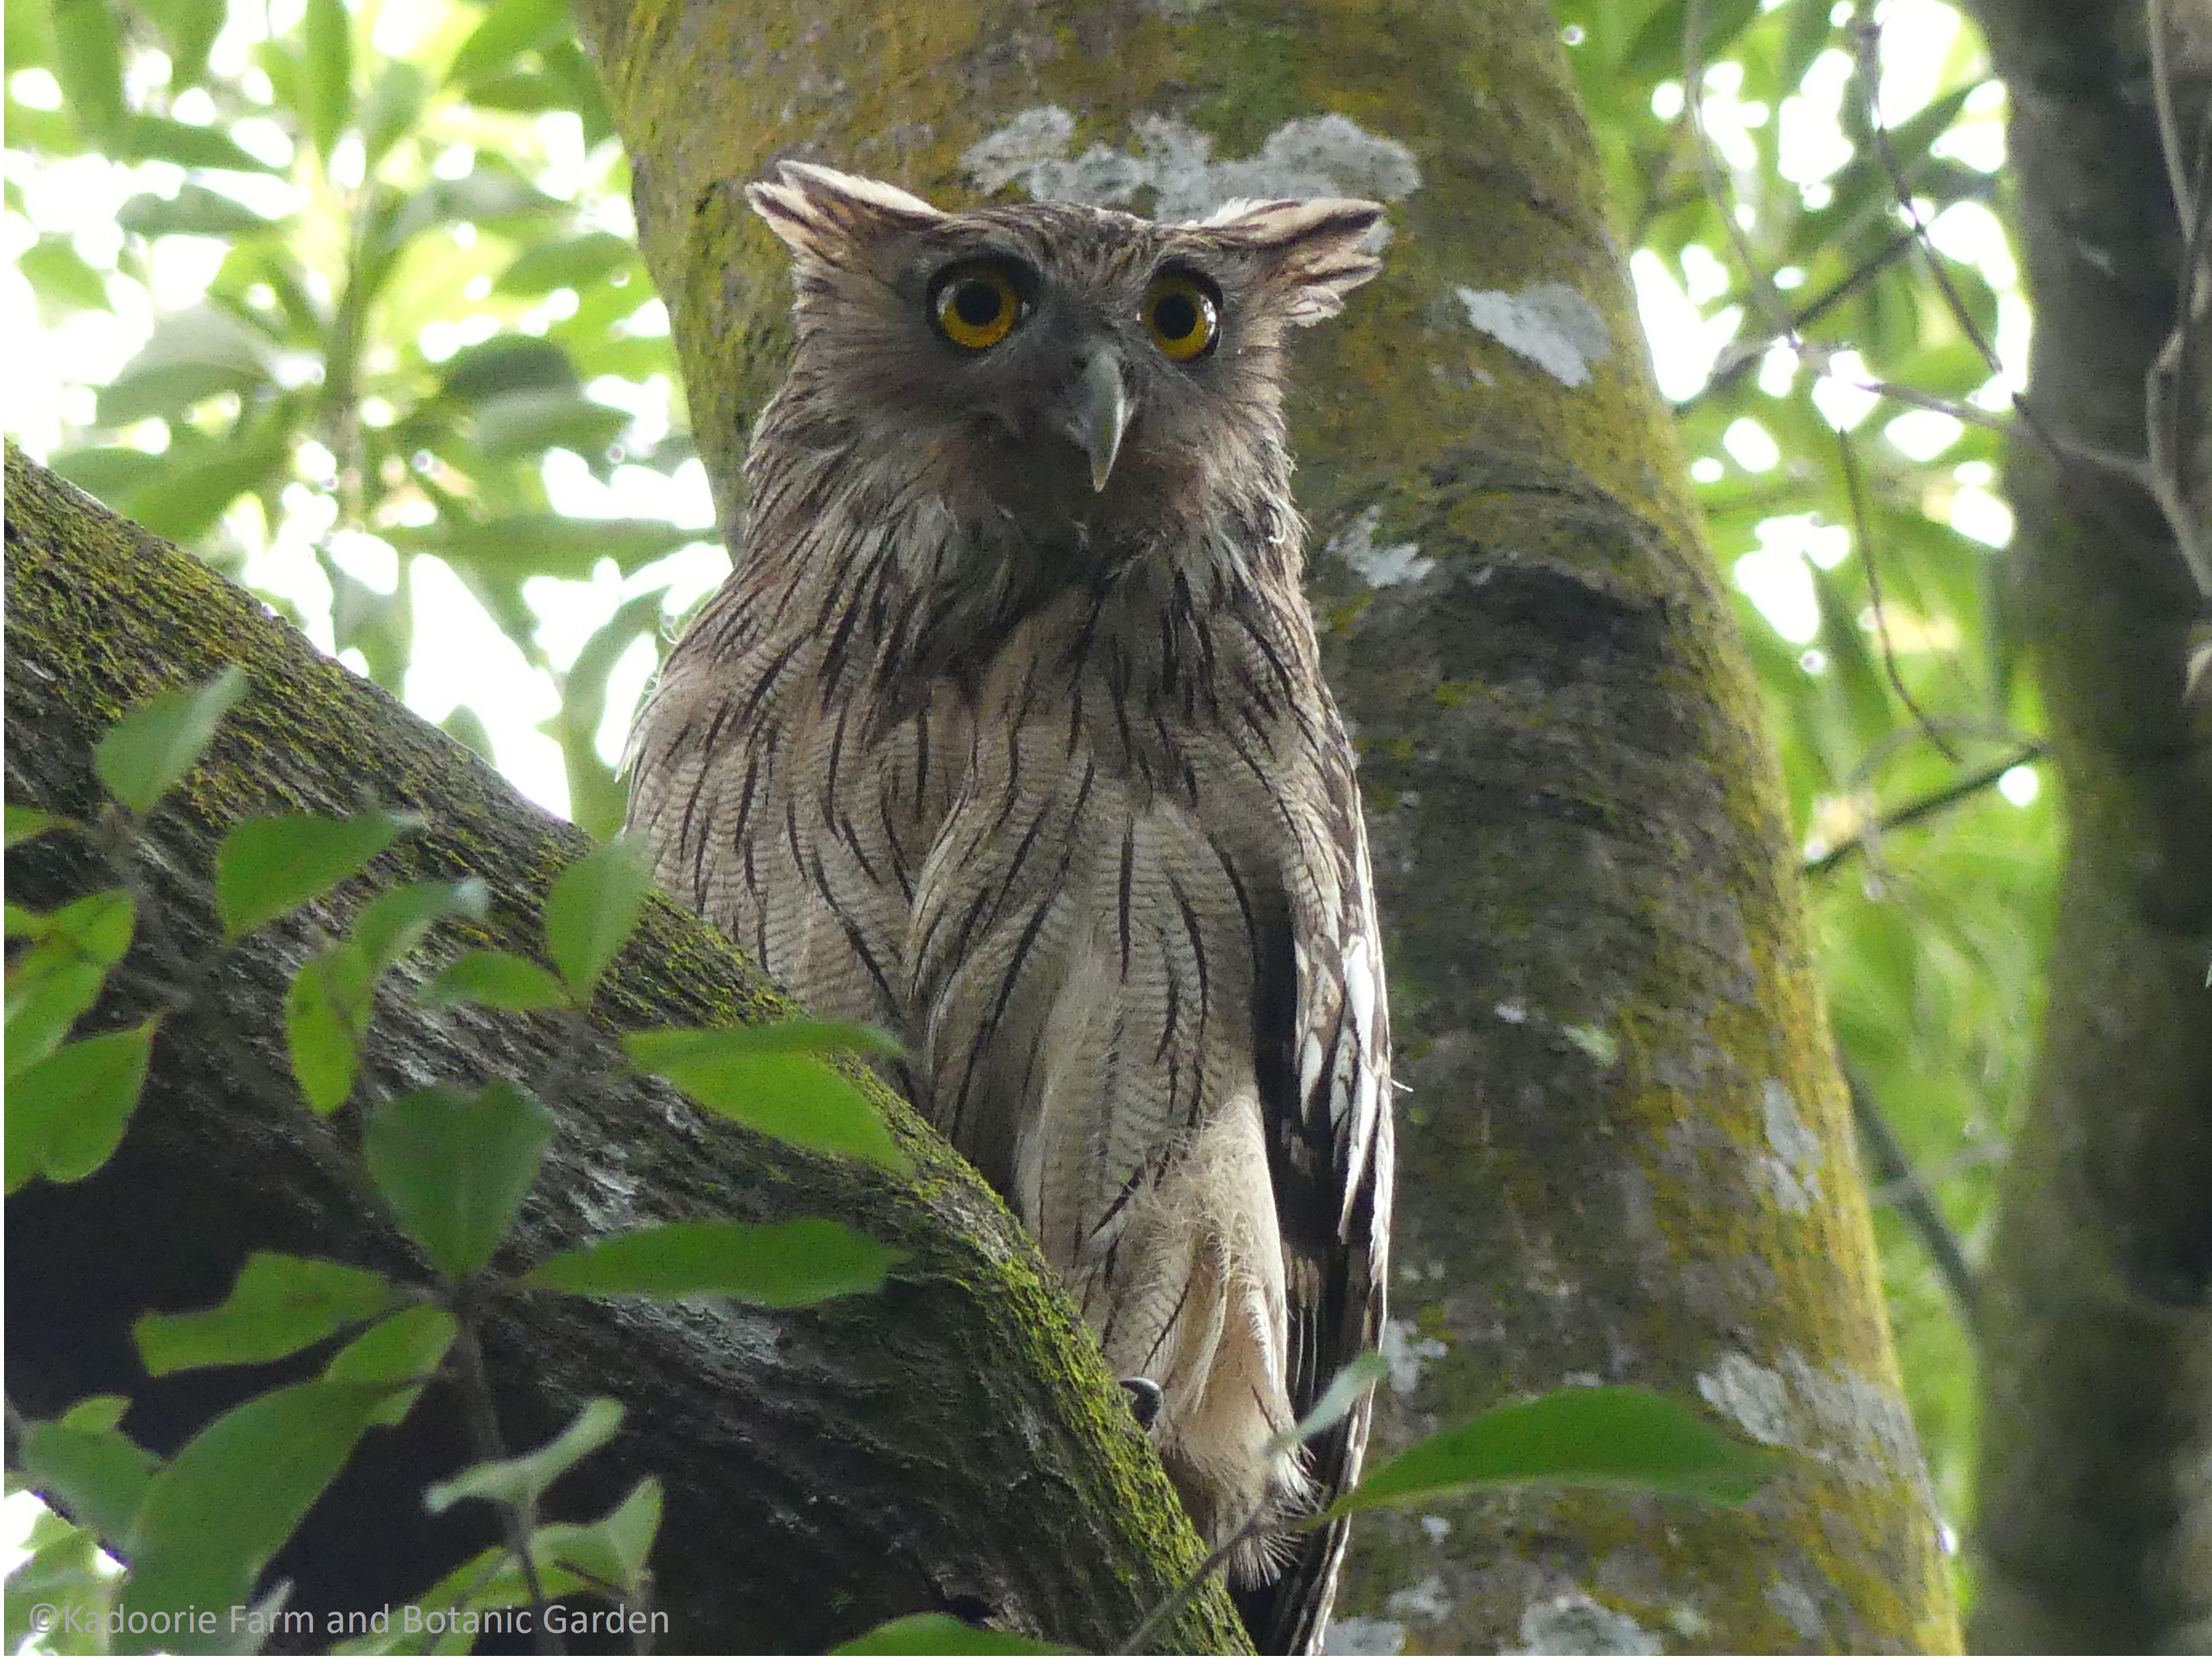 The Brown Fish Owl nestling with well-developed feathers shortly before it left the tree nest in the New Territories.